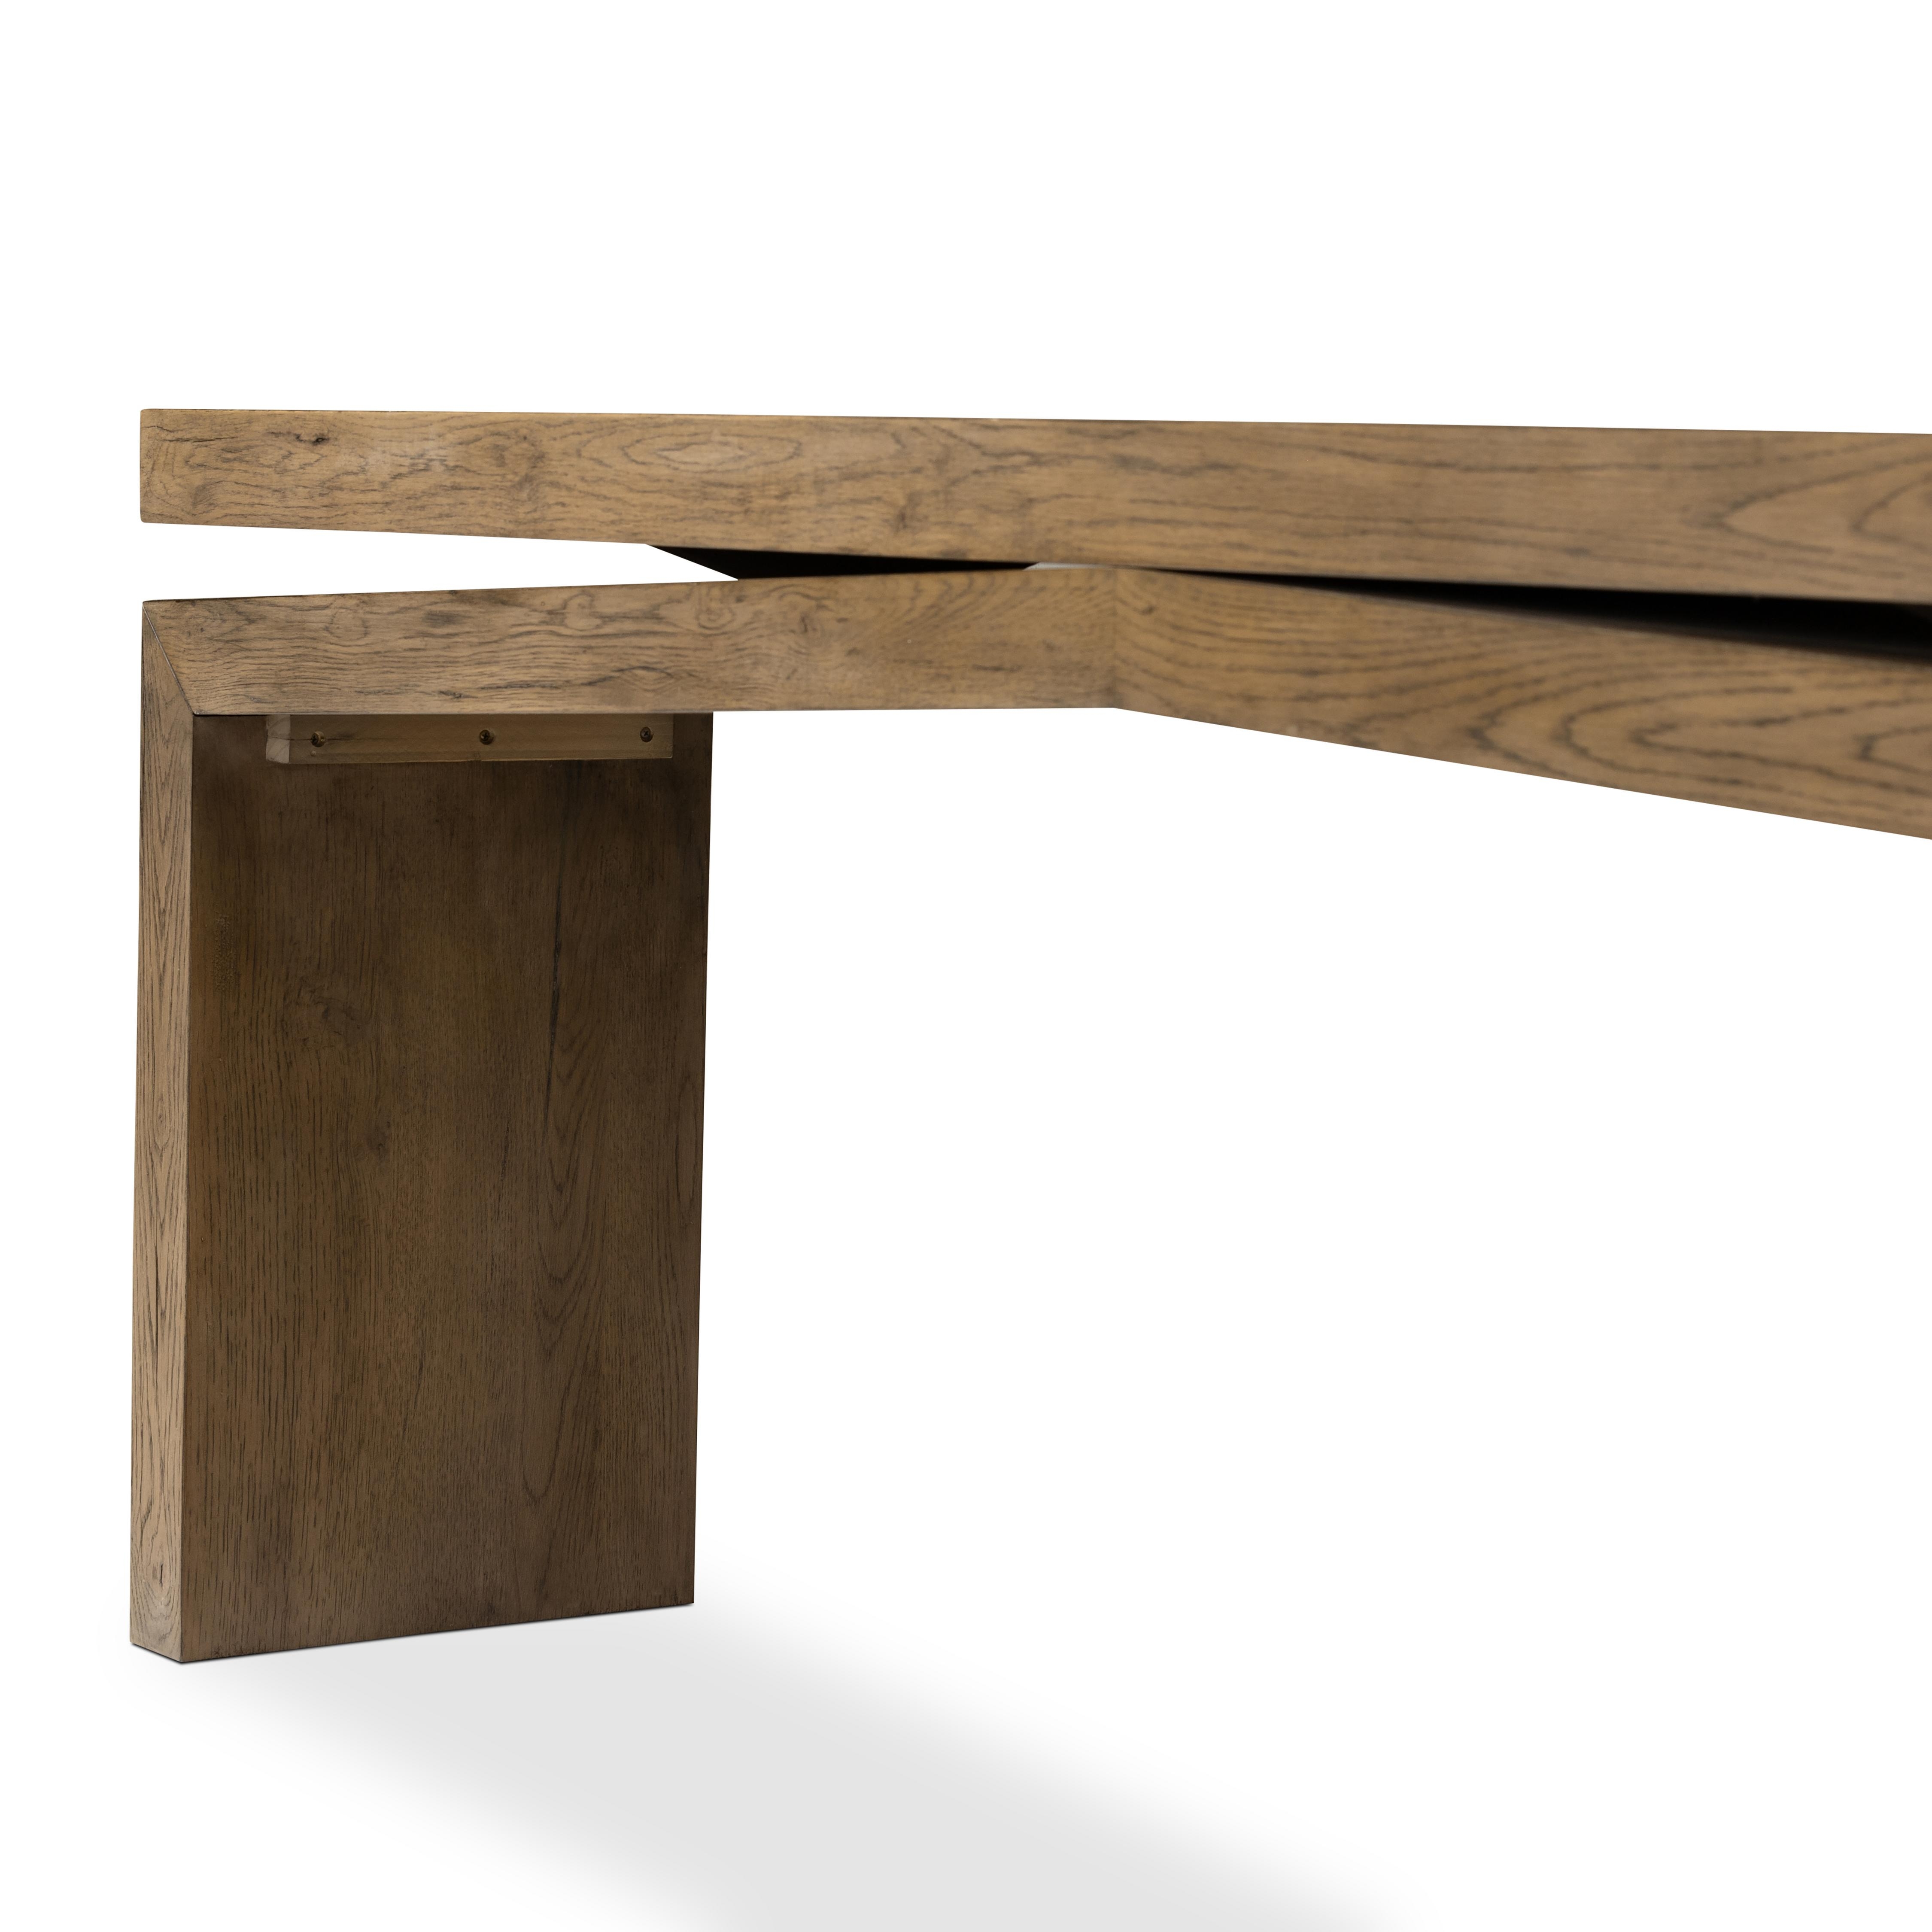 Matthes Console Table-Rustic Natural - Image 8